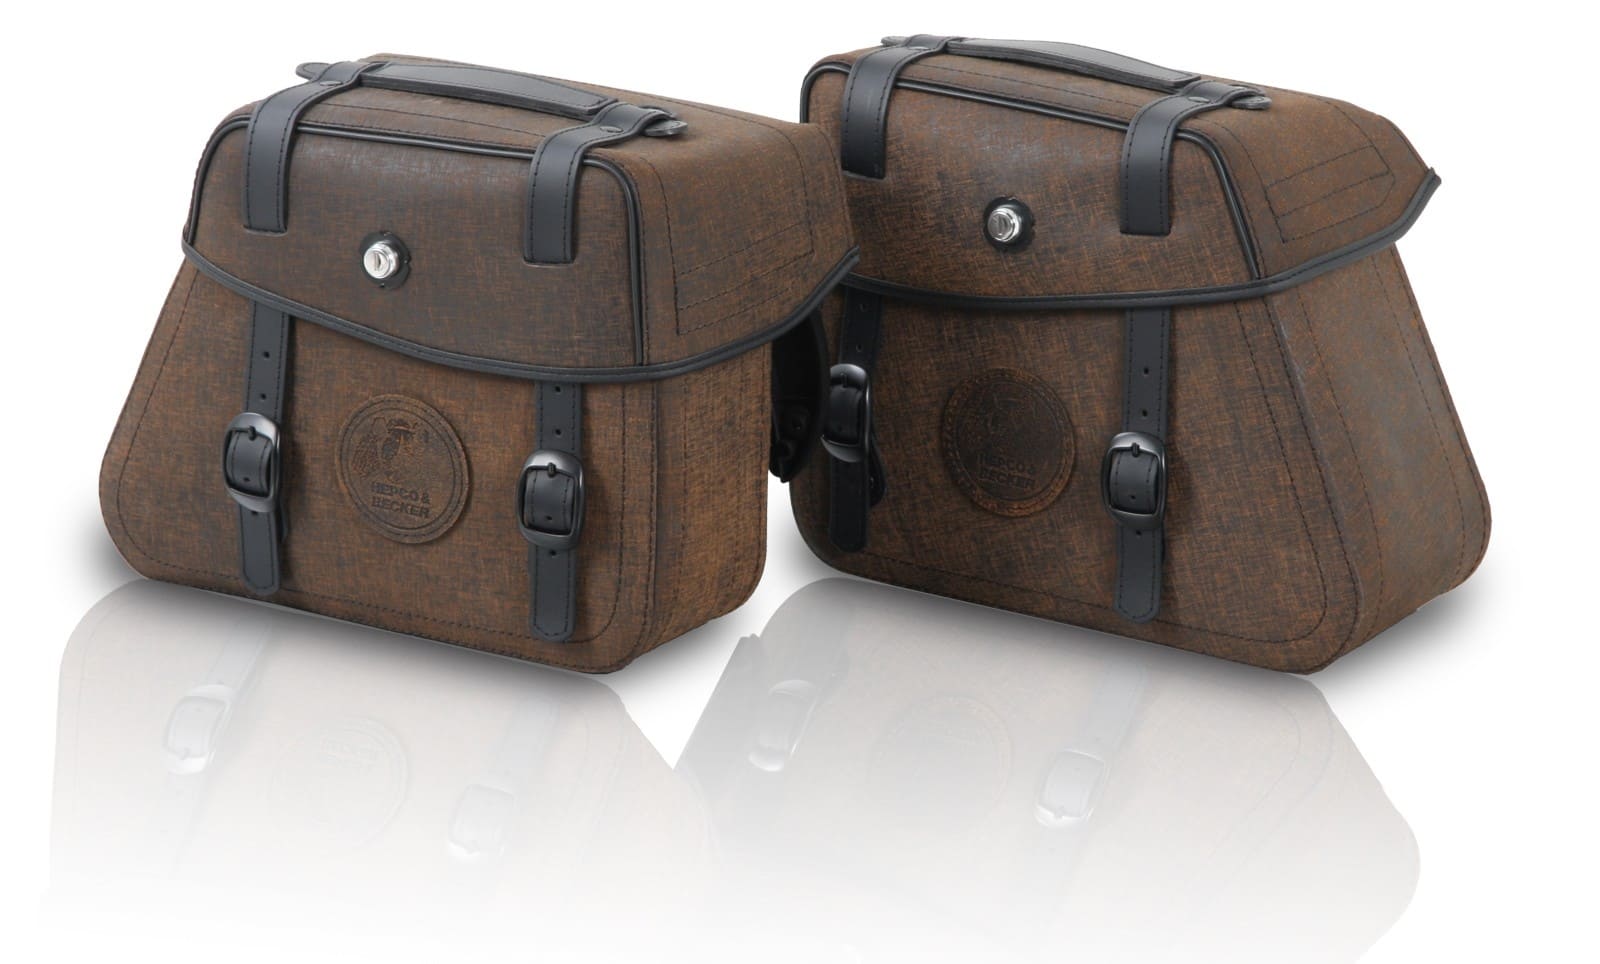 Rugged leather bag set Cutout incl. quick release fastening - brown 